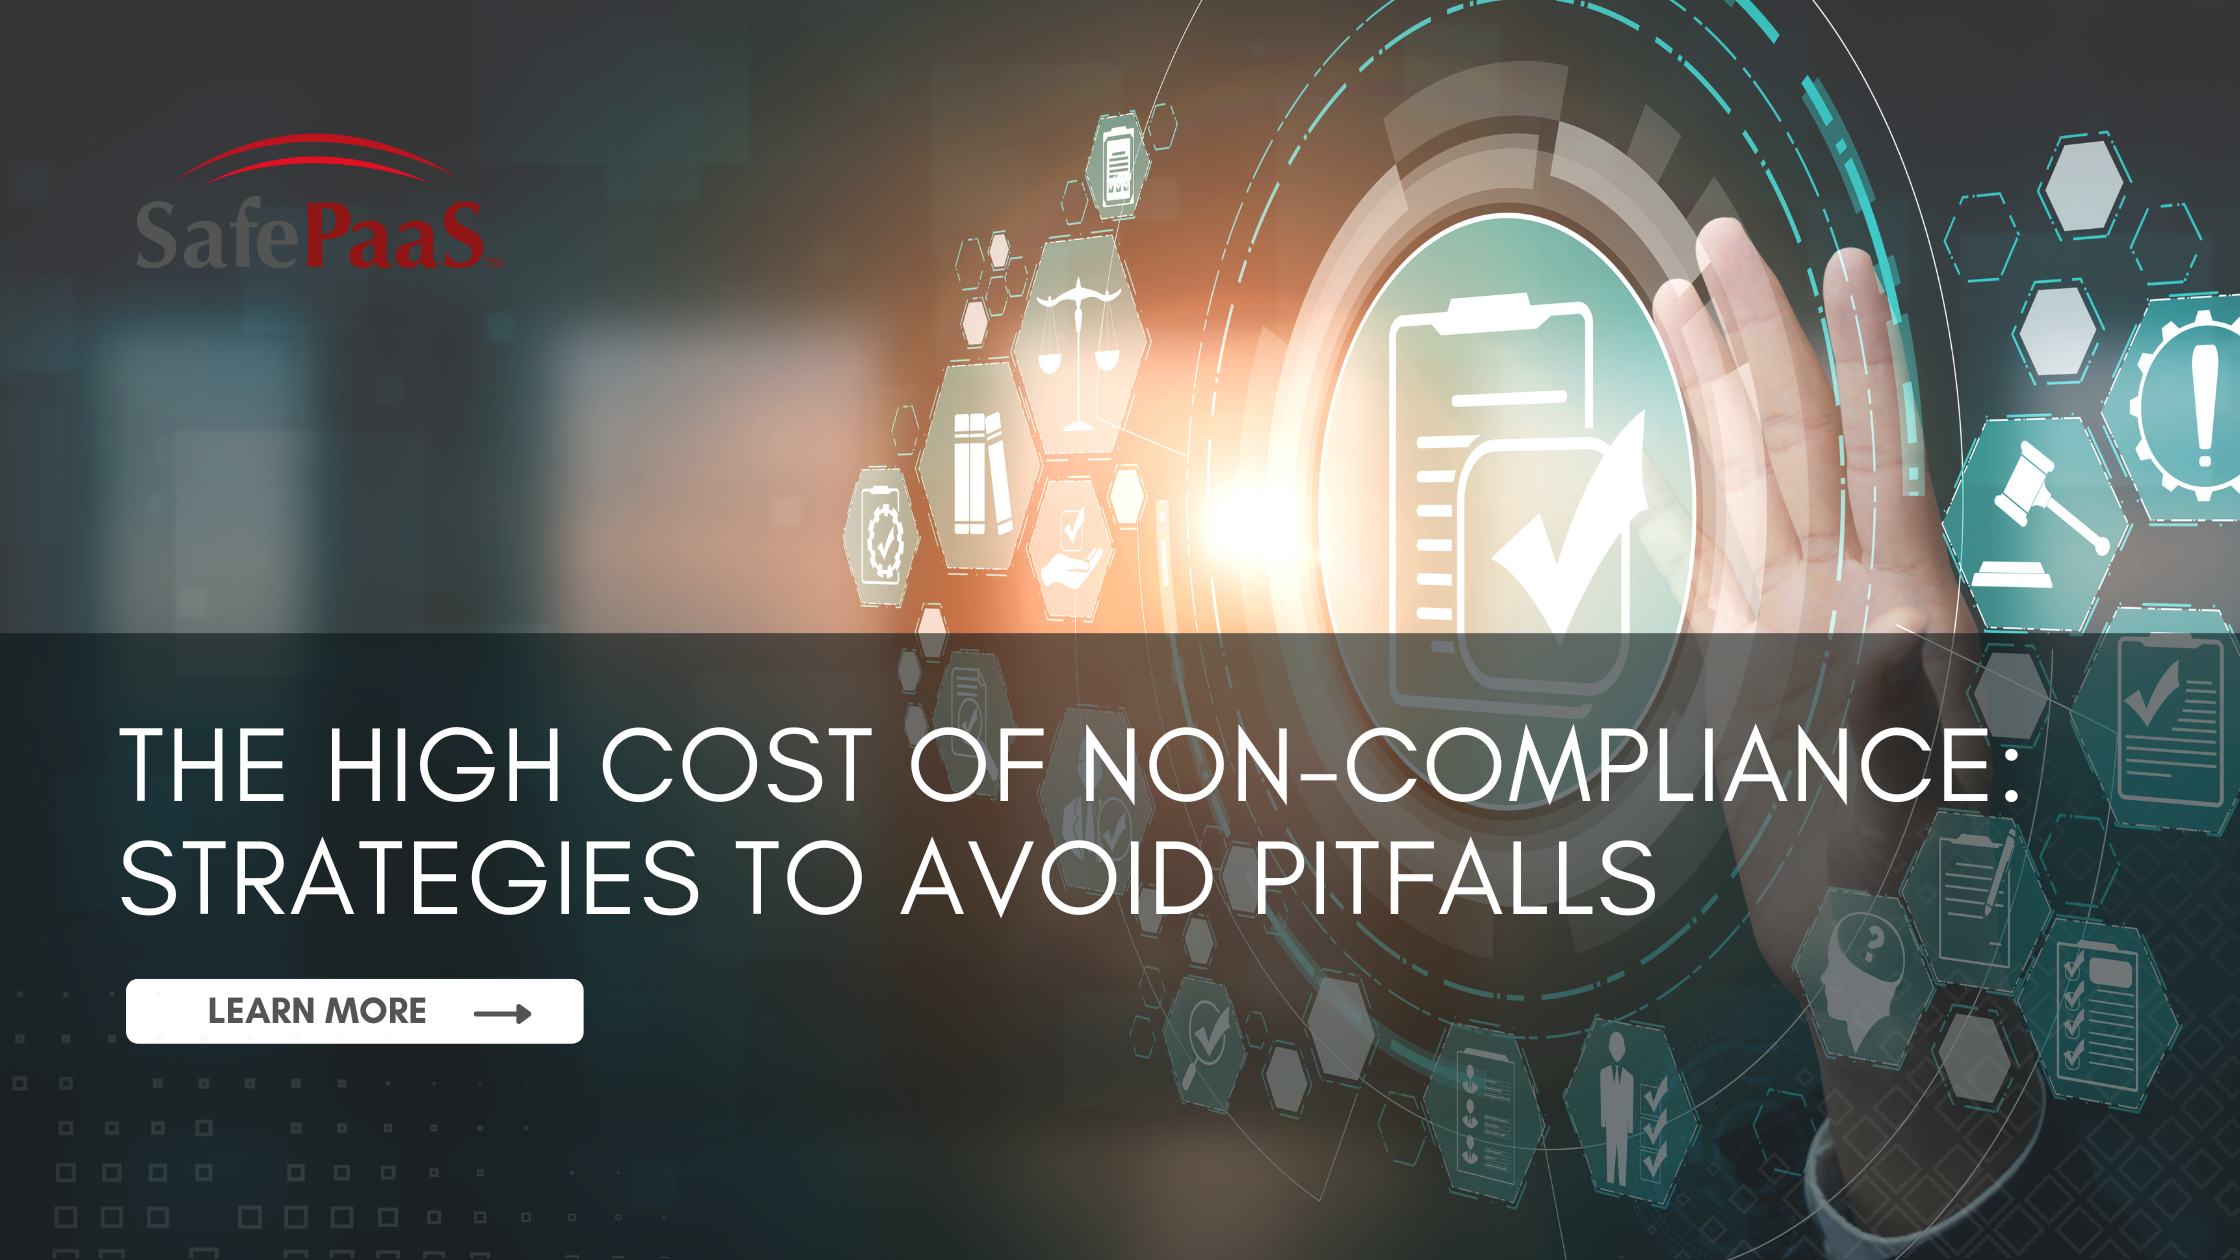 The cost of non-compliance